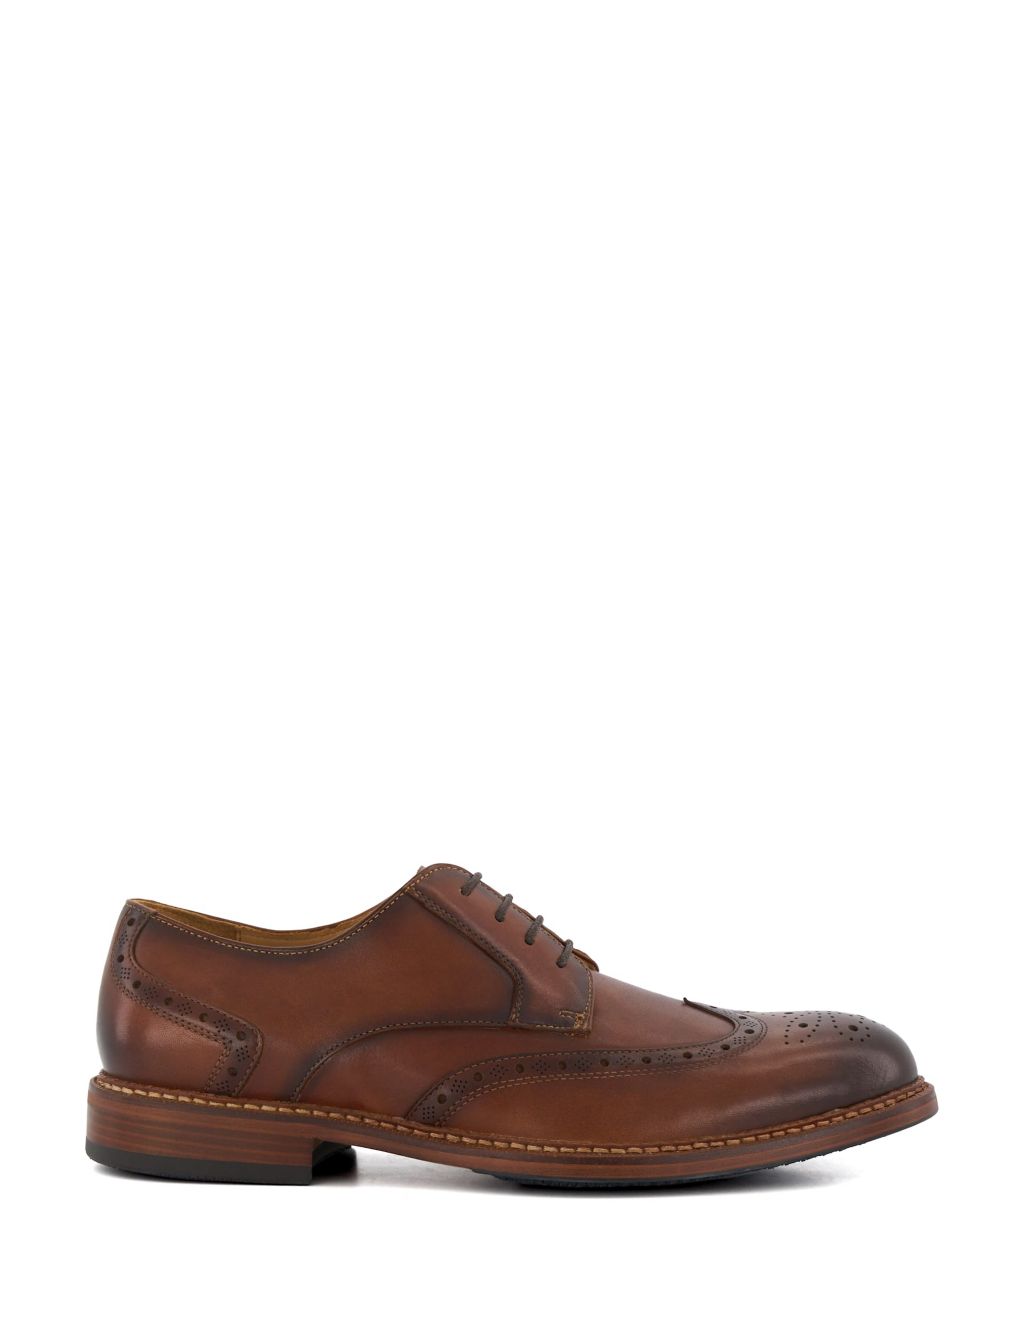 Buy Leather Brogues | Dune London | M&S